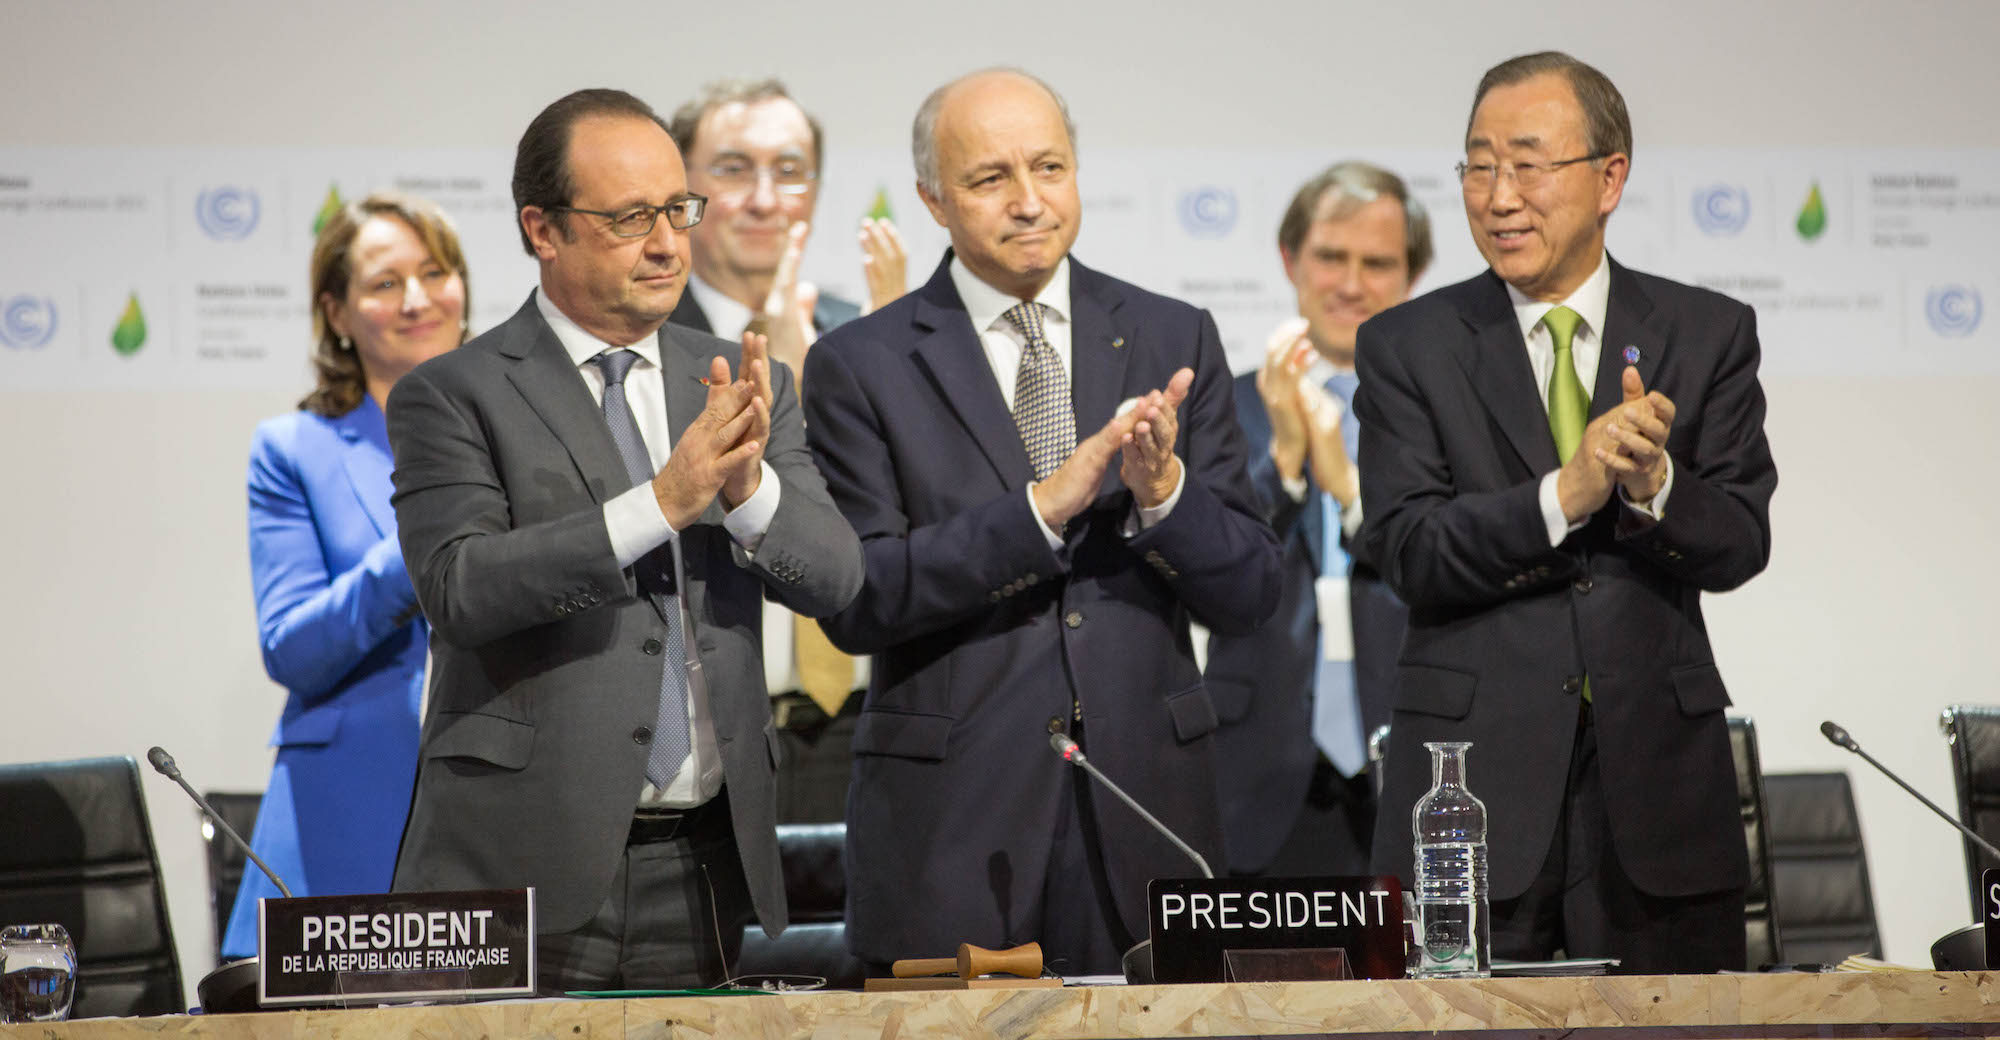 The Paris Agreement is signed, an agreement to help fight global warming.